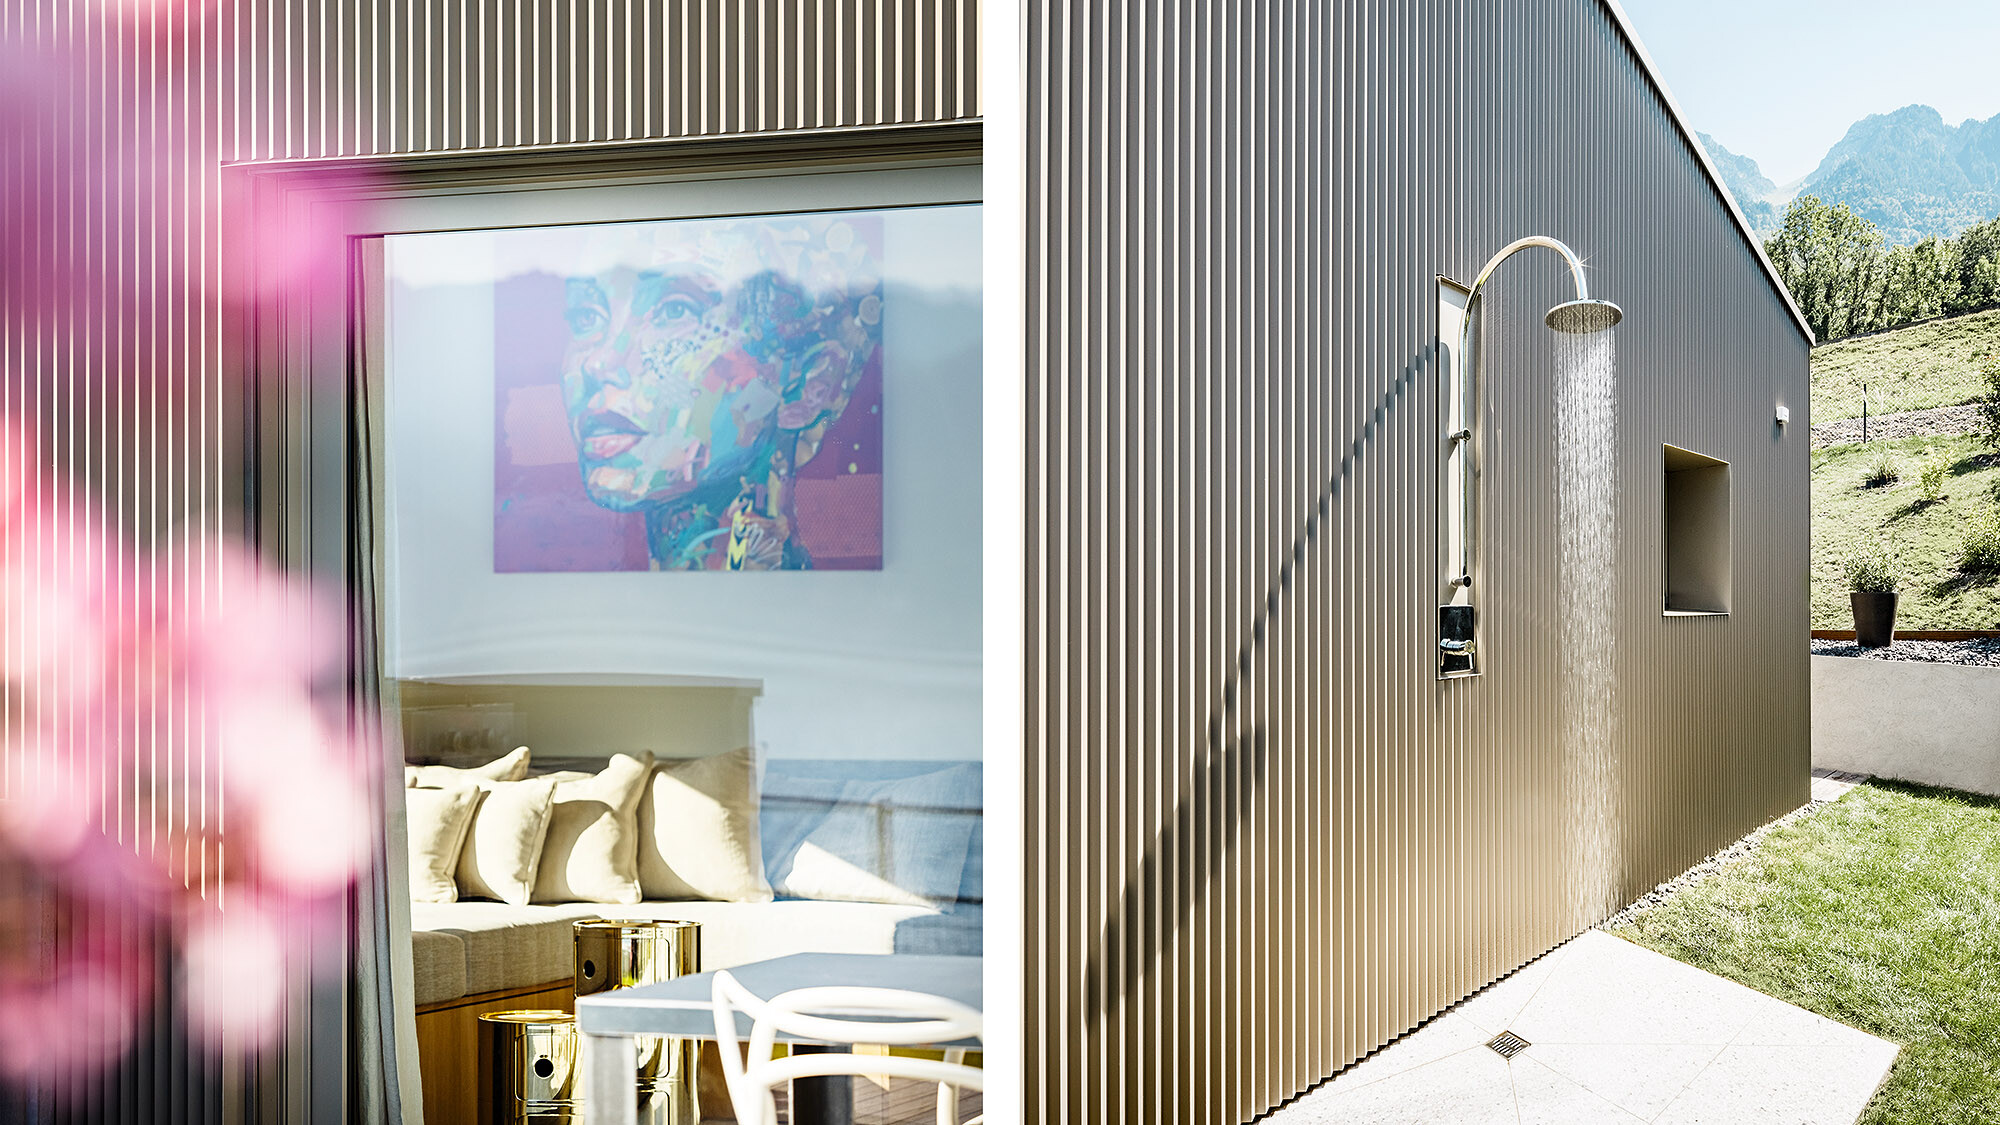 On the left: a view, framed by pink flowers and bronze-coloured aluminium, into the interior with a couch and a painting. On the right: the external shower.